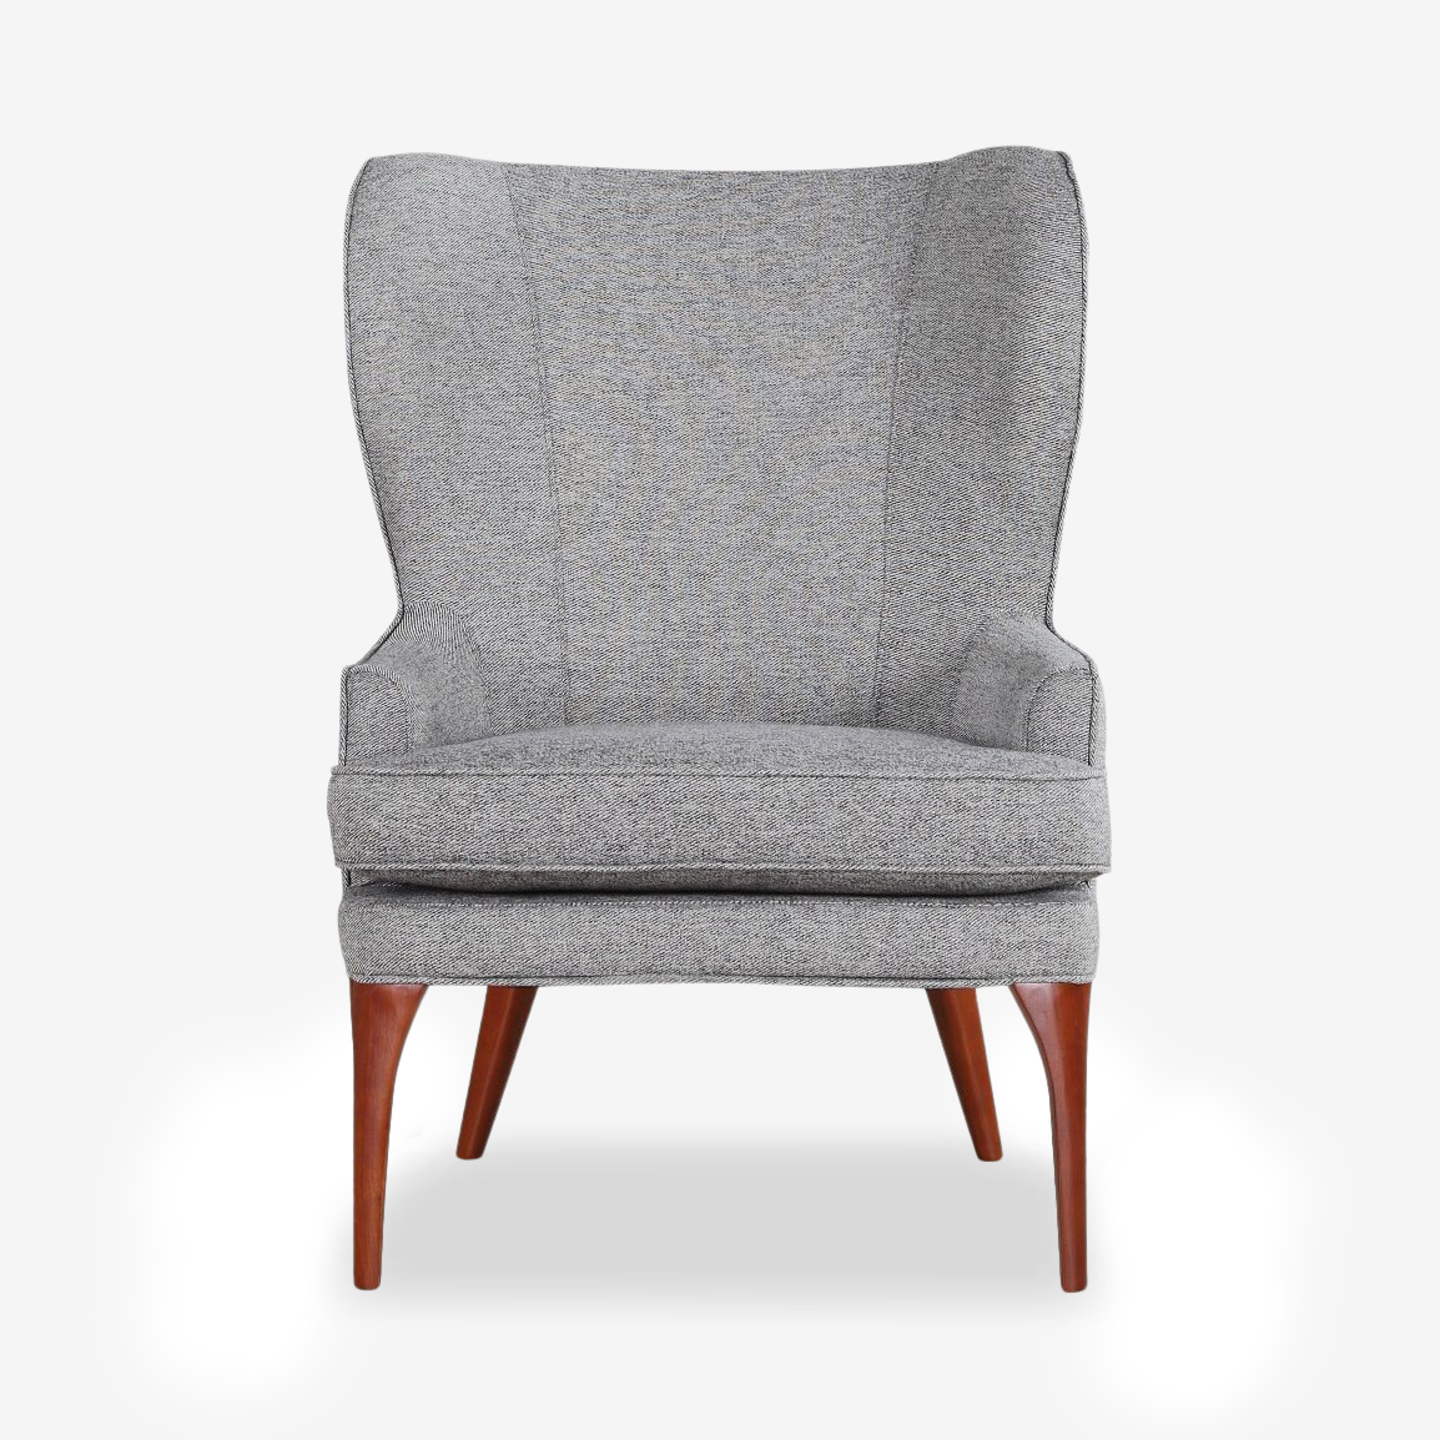 389_Correct_Bowen-Accent-Chair-Grey_Detail-Front